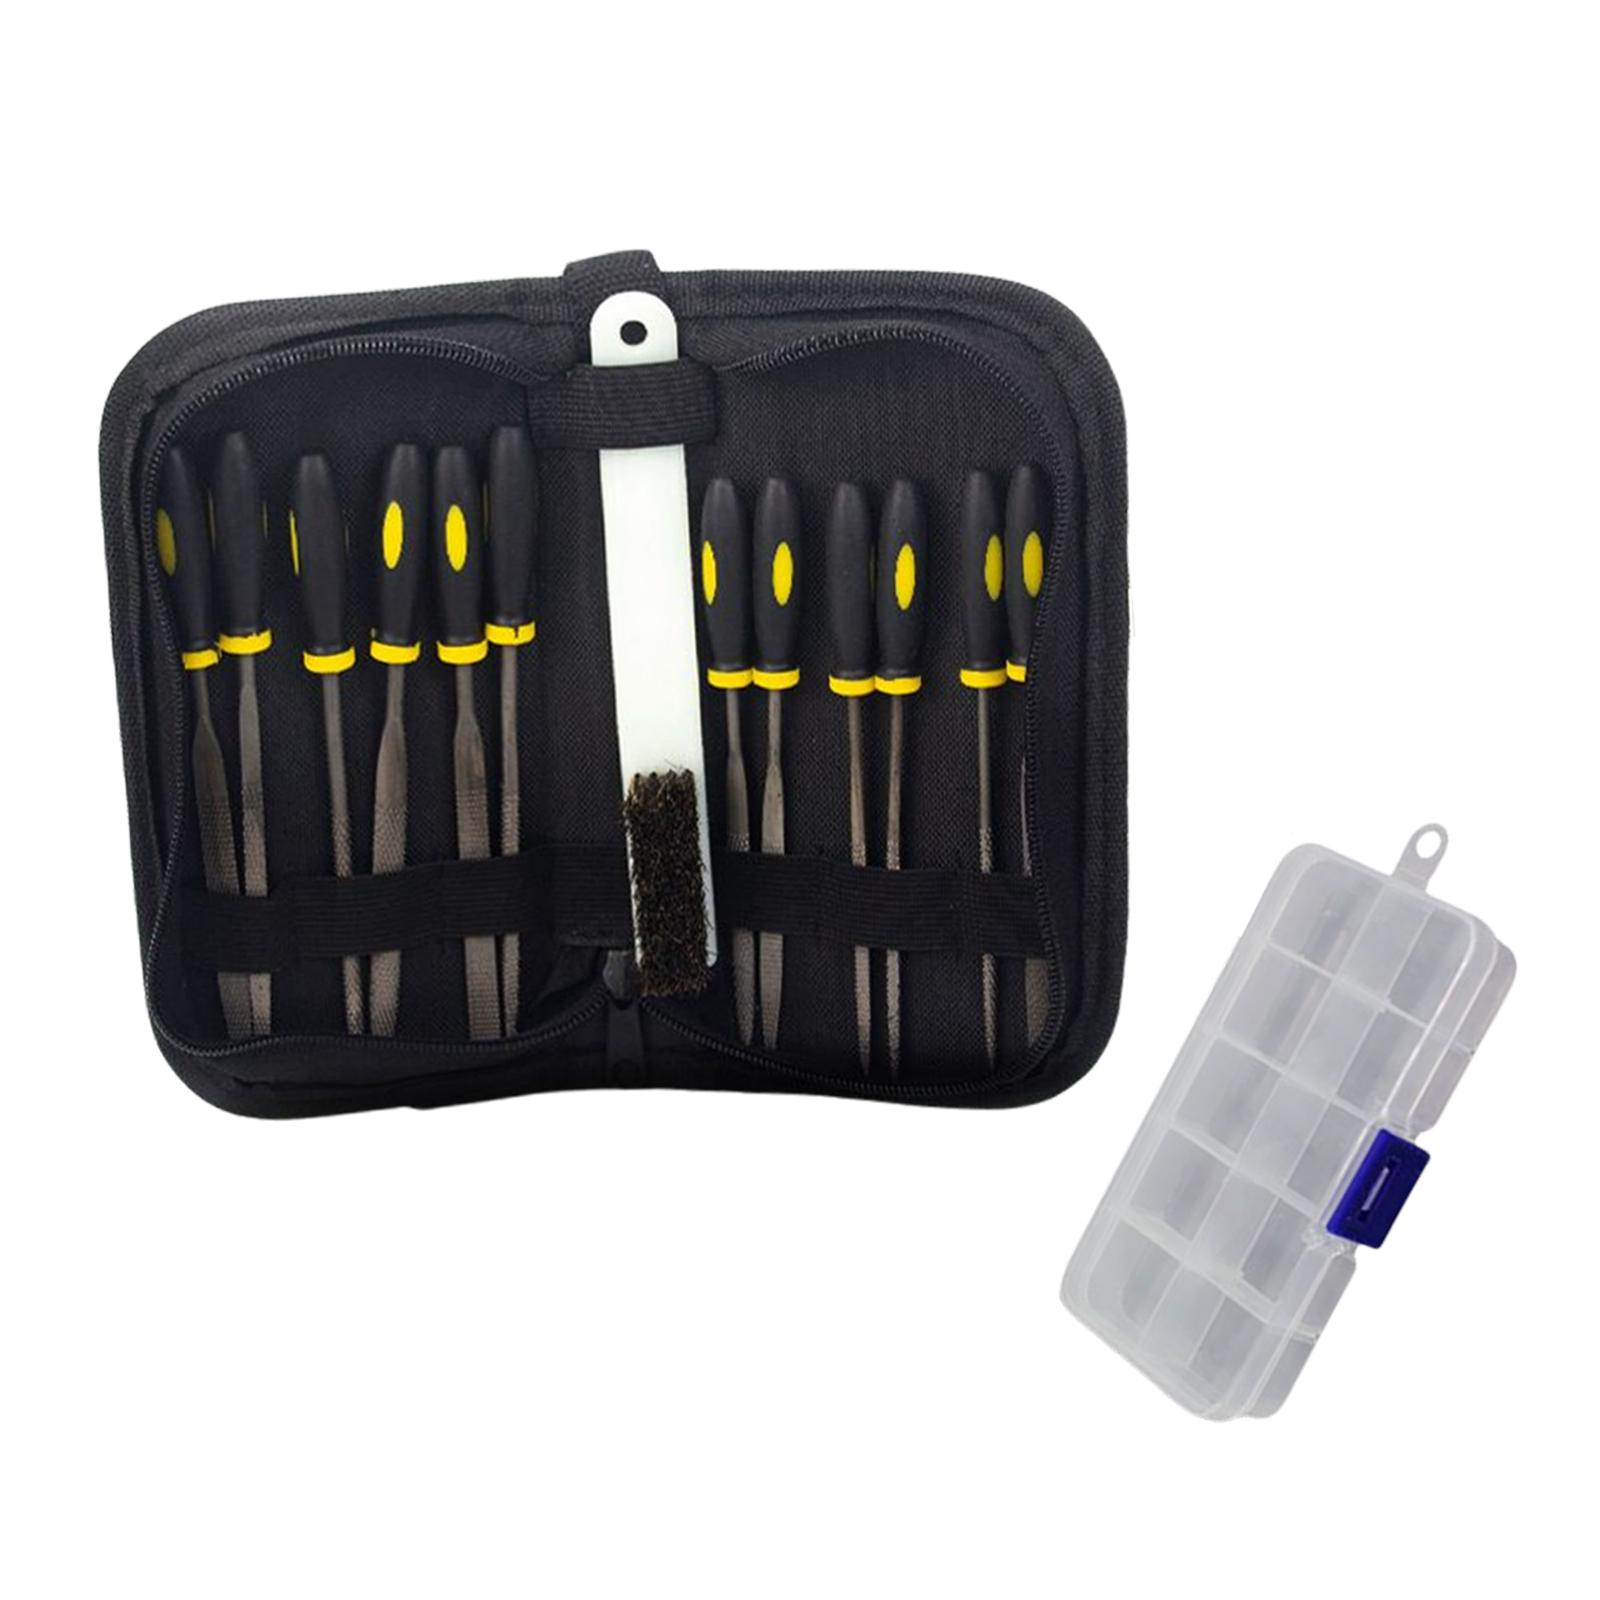 Needle File Set Craft files Tools for Crafts Wood Metalworking Woodworking